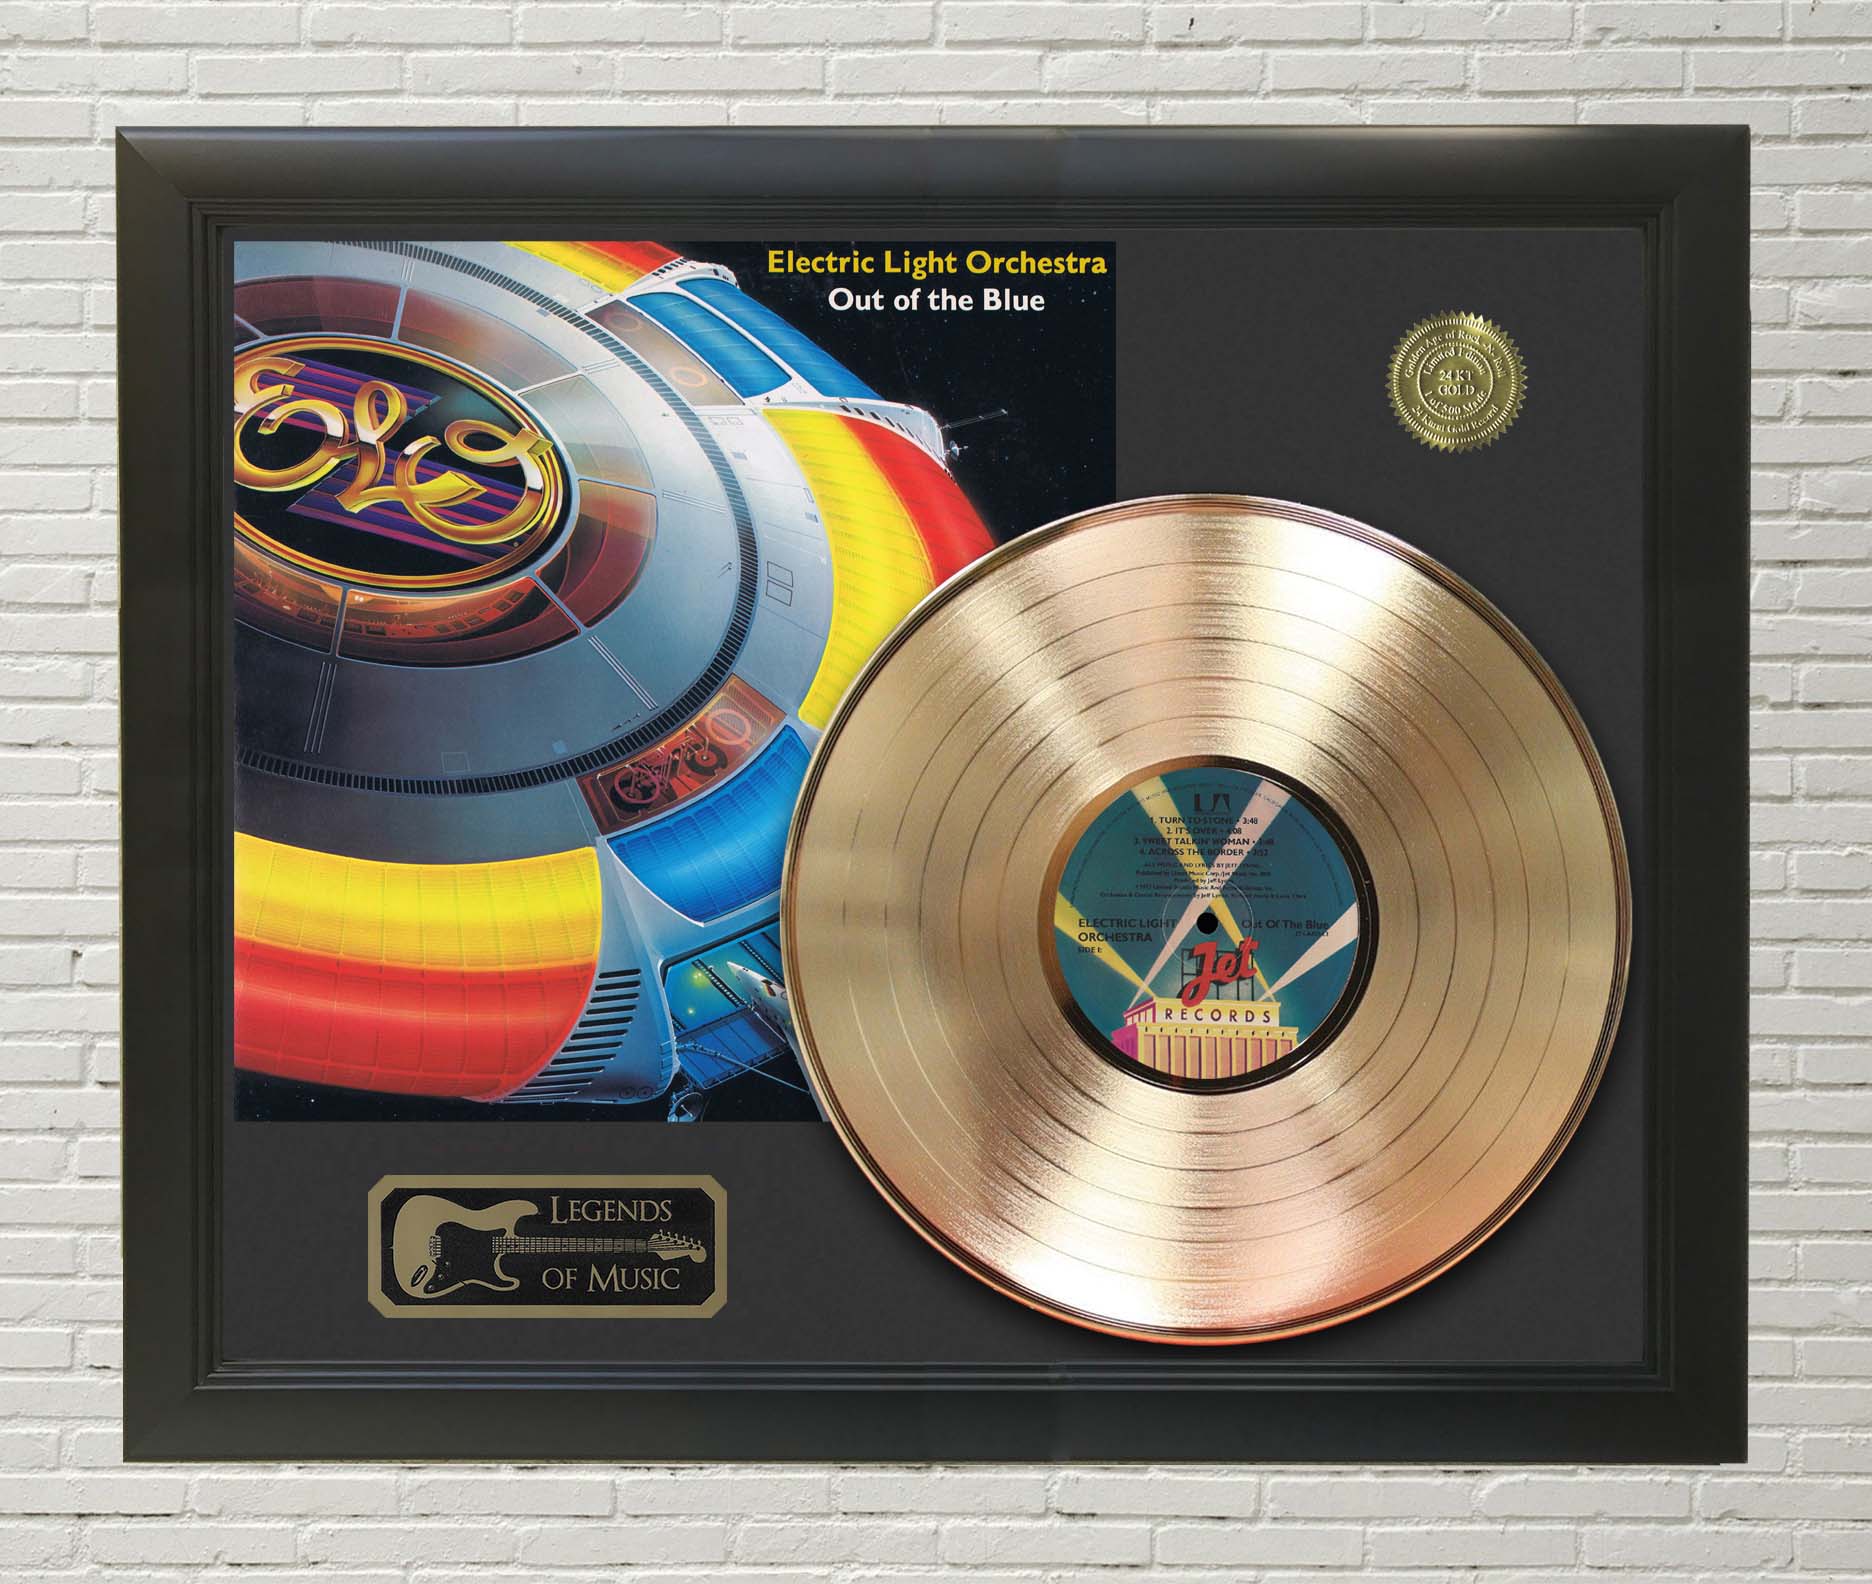 Light Orchestra – Of The Blue Framed LP Record Display C3 - Gold Record Outlet and Disc Collectible Memorabilia